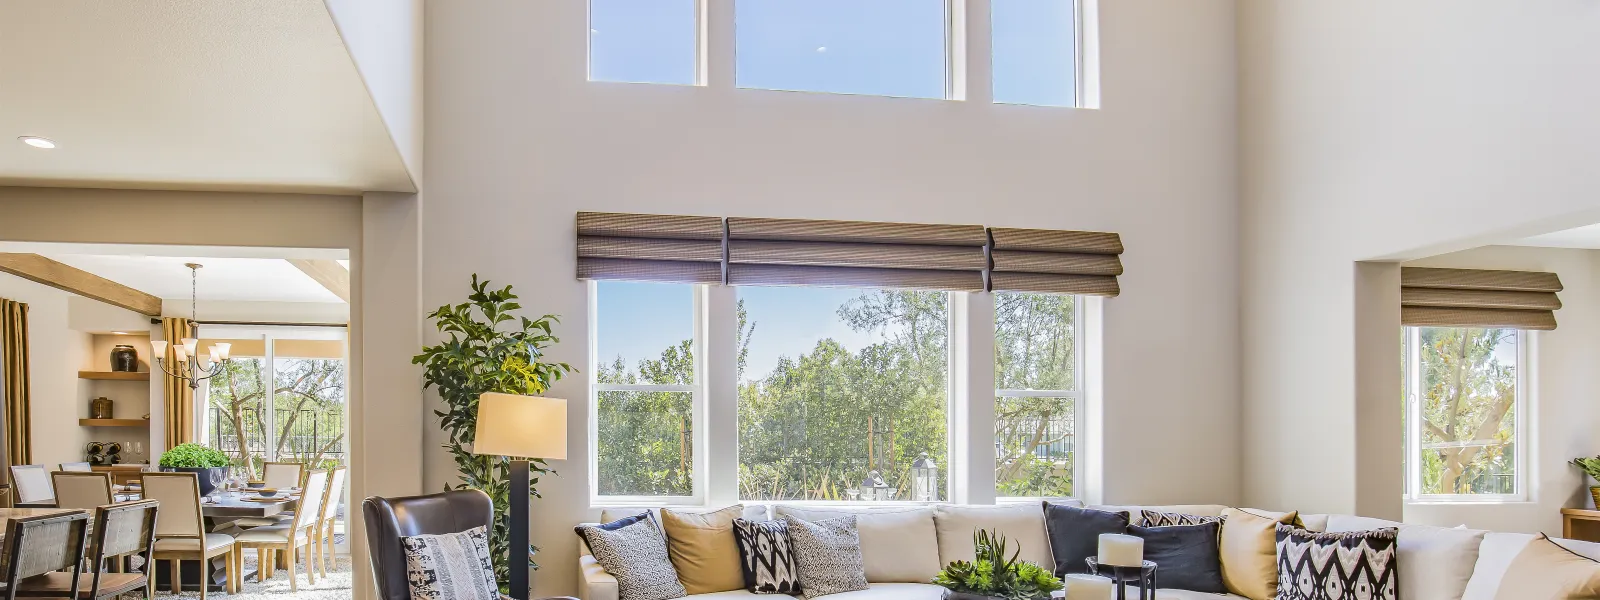 5 Tricks to Make Old Windows More Energy Efficient